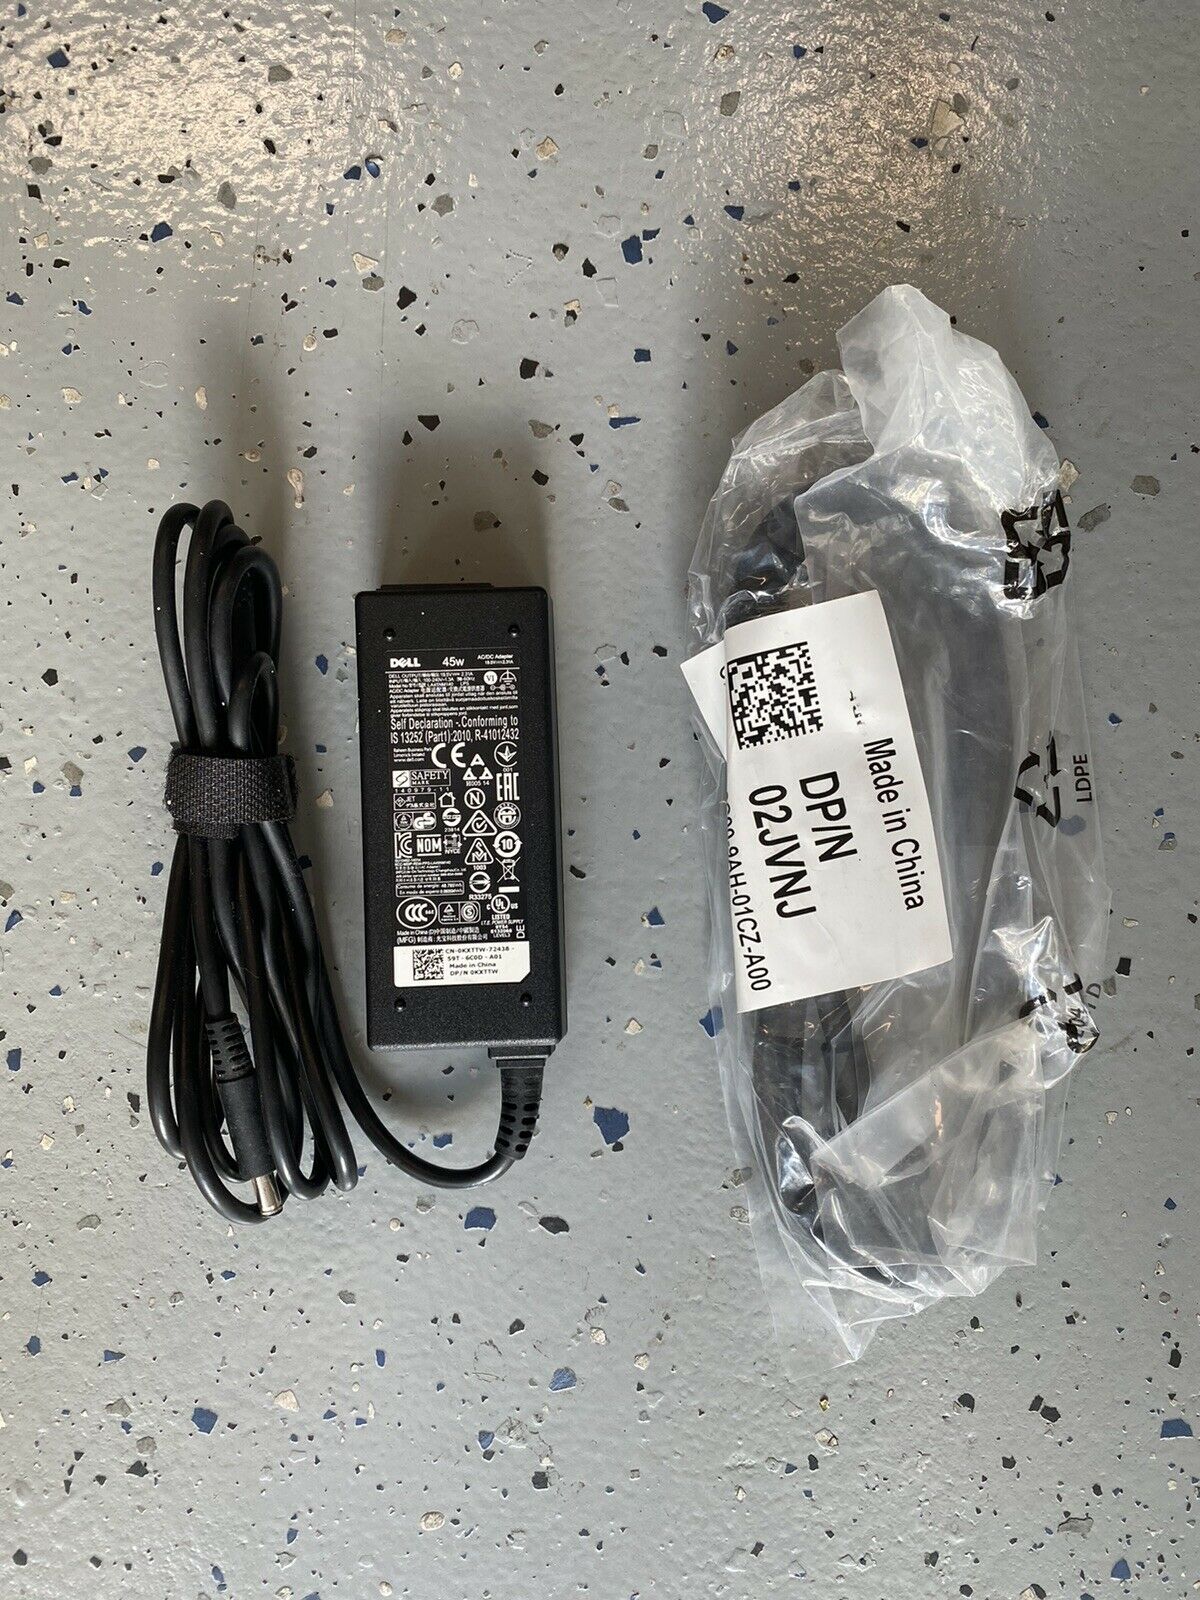 Original OEM DELL XPS 45W AC Adapter 0YTFJC 0KXTTW 00285K 070VTC DA45NW140 Compatible Brand: For Dell Connector:: 4.5m